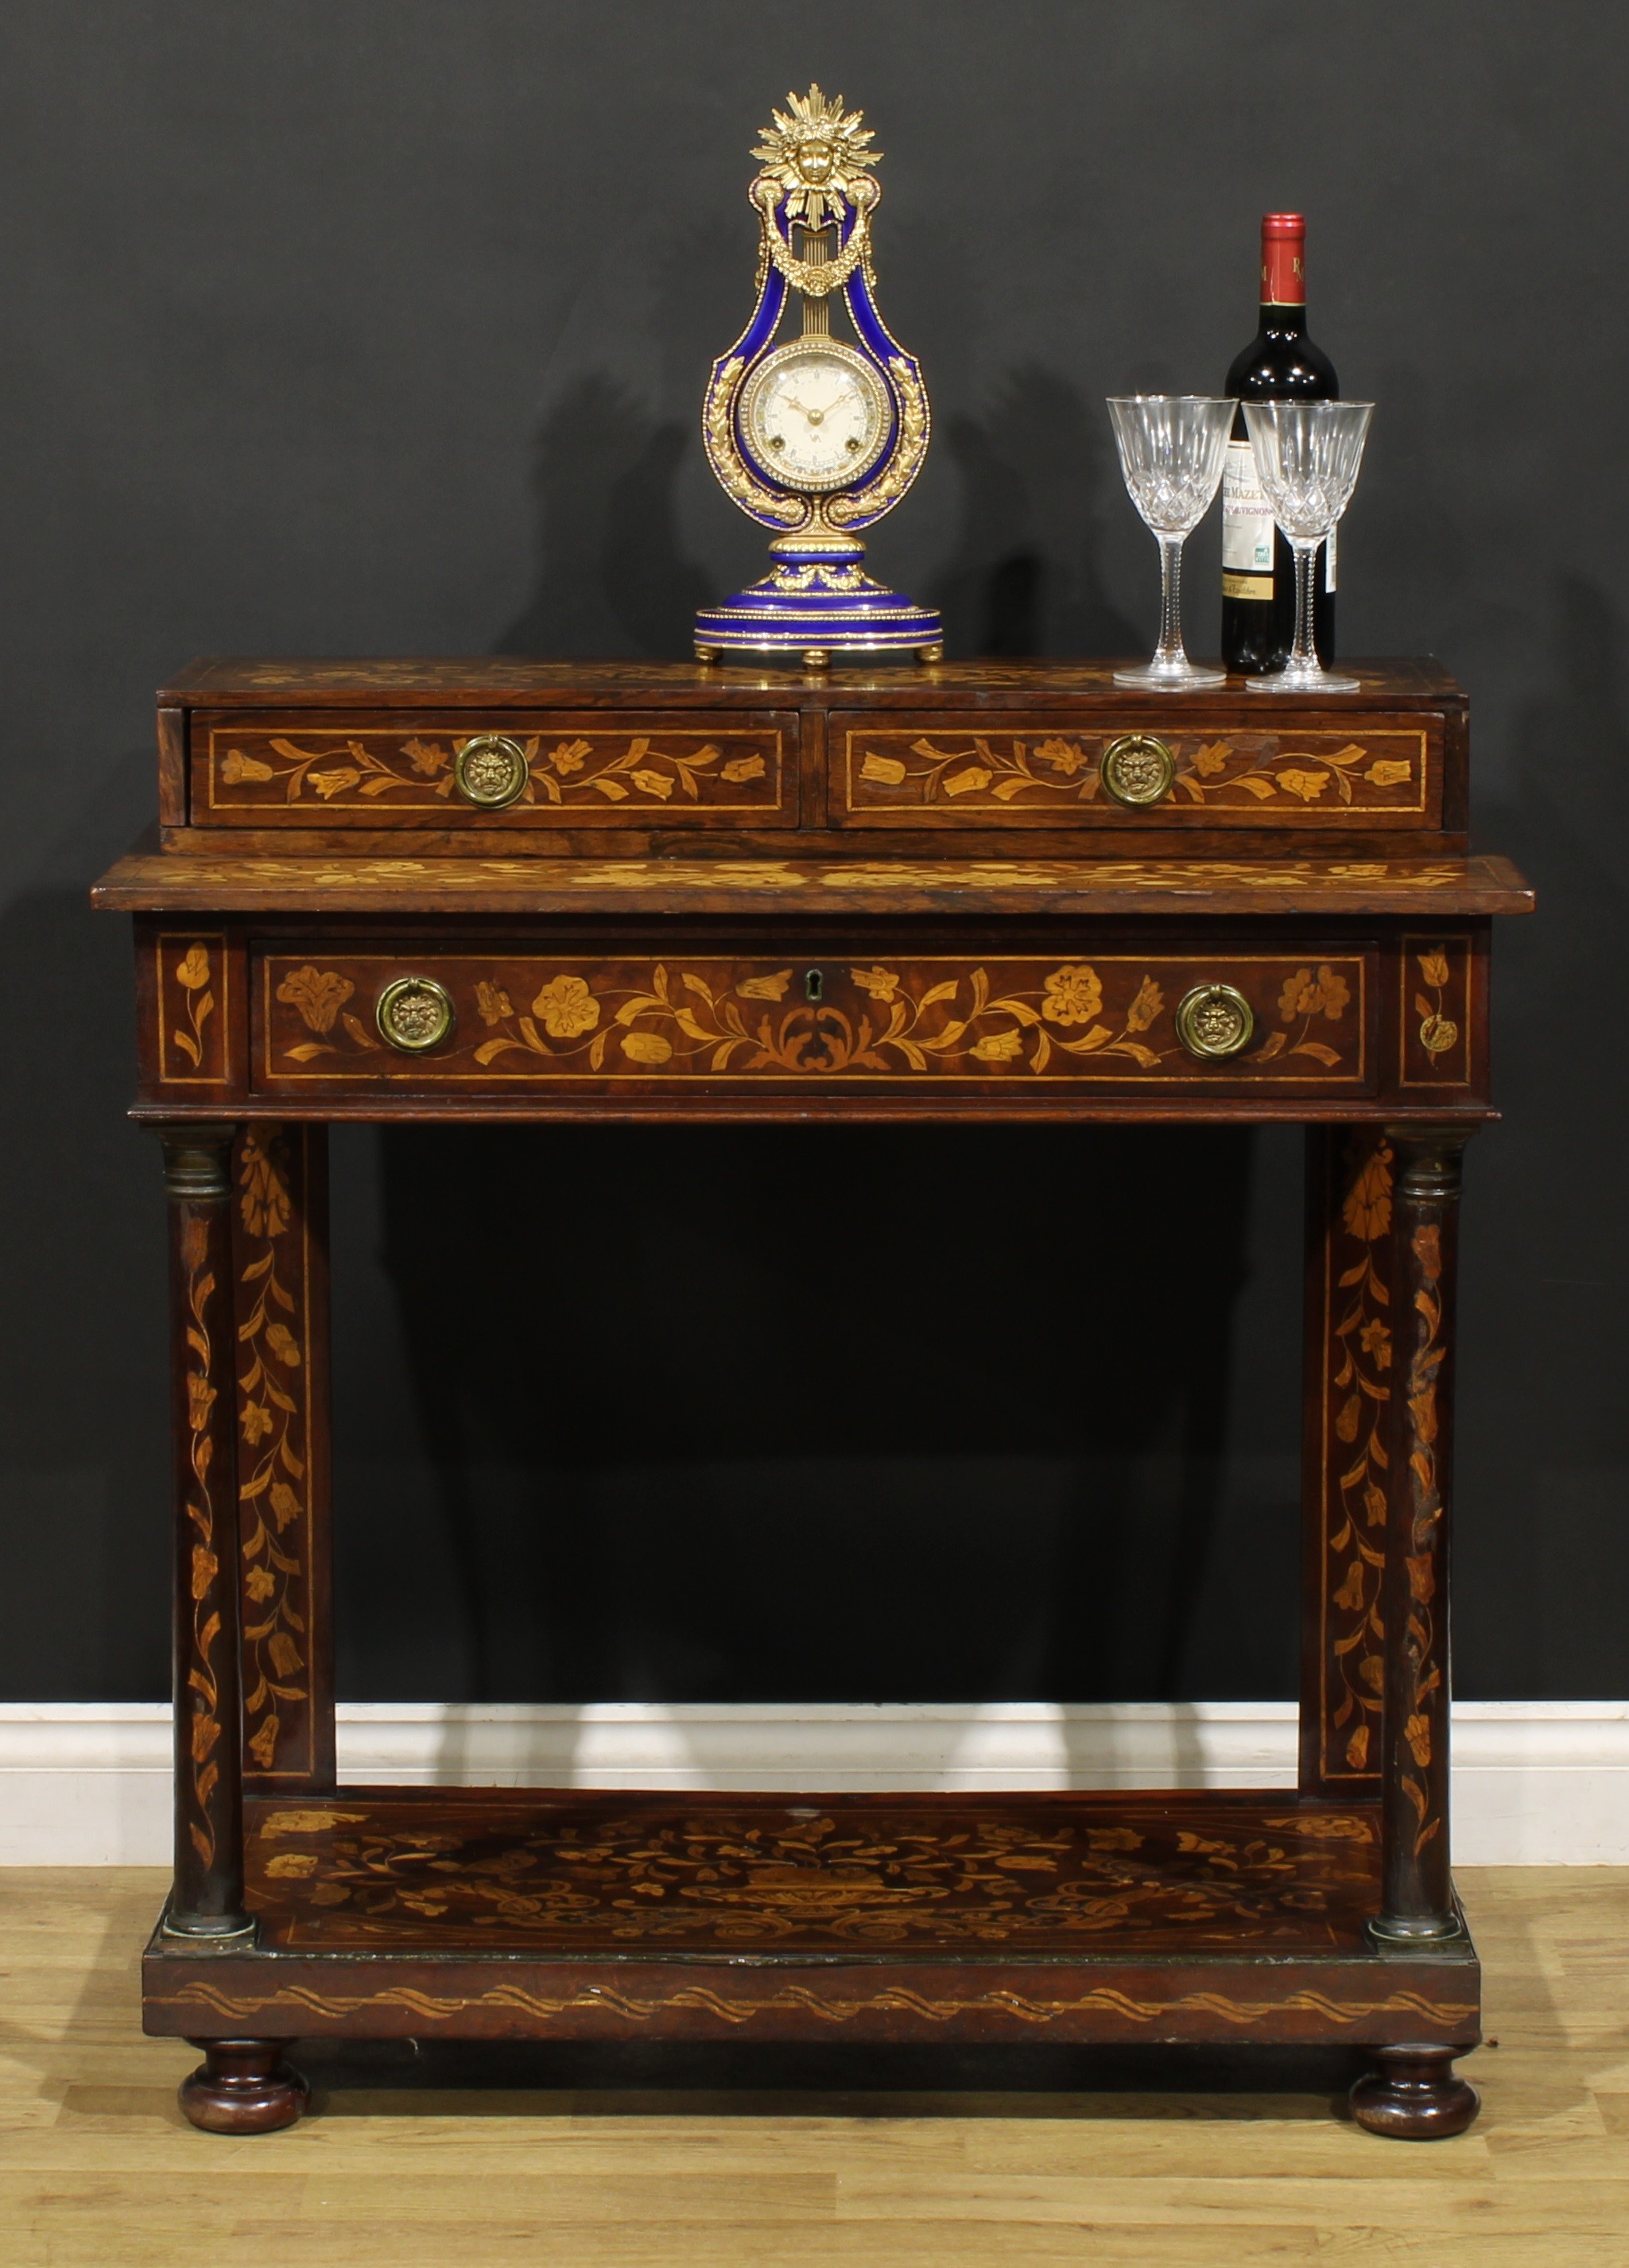 A 19th century Dutch marquetry pier table, rectangular superstructure with a pair of short